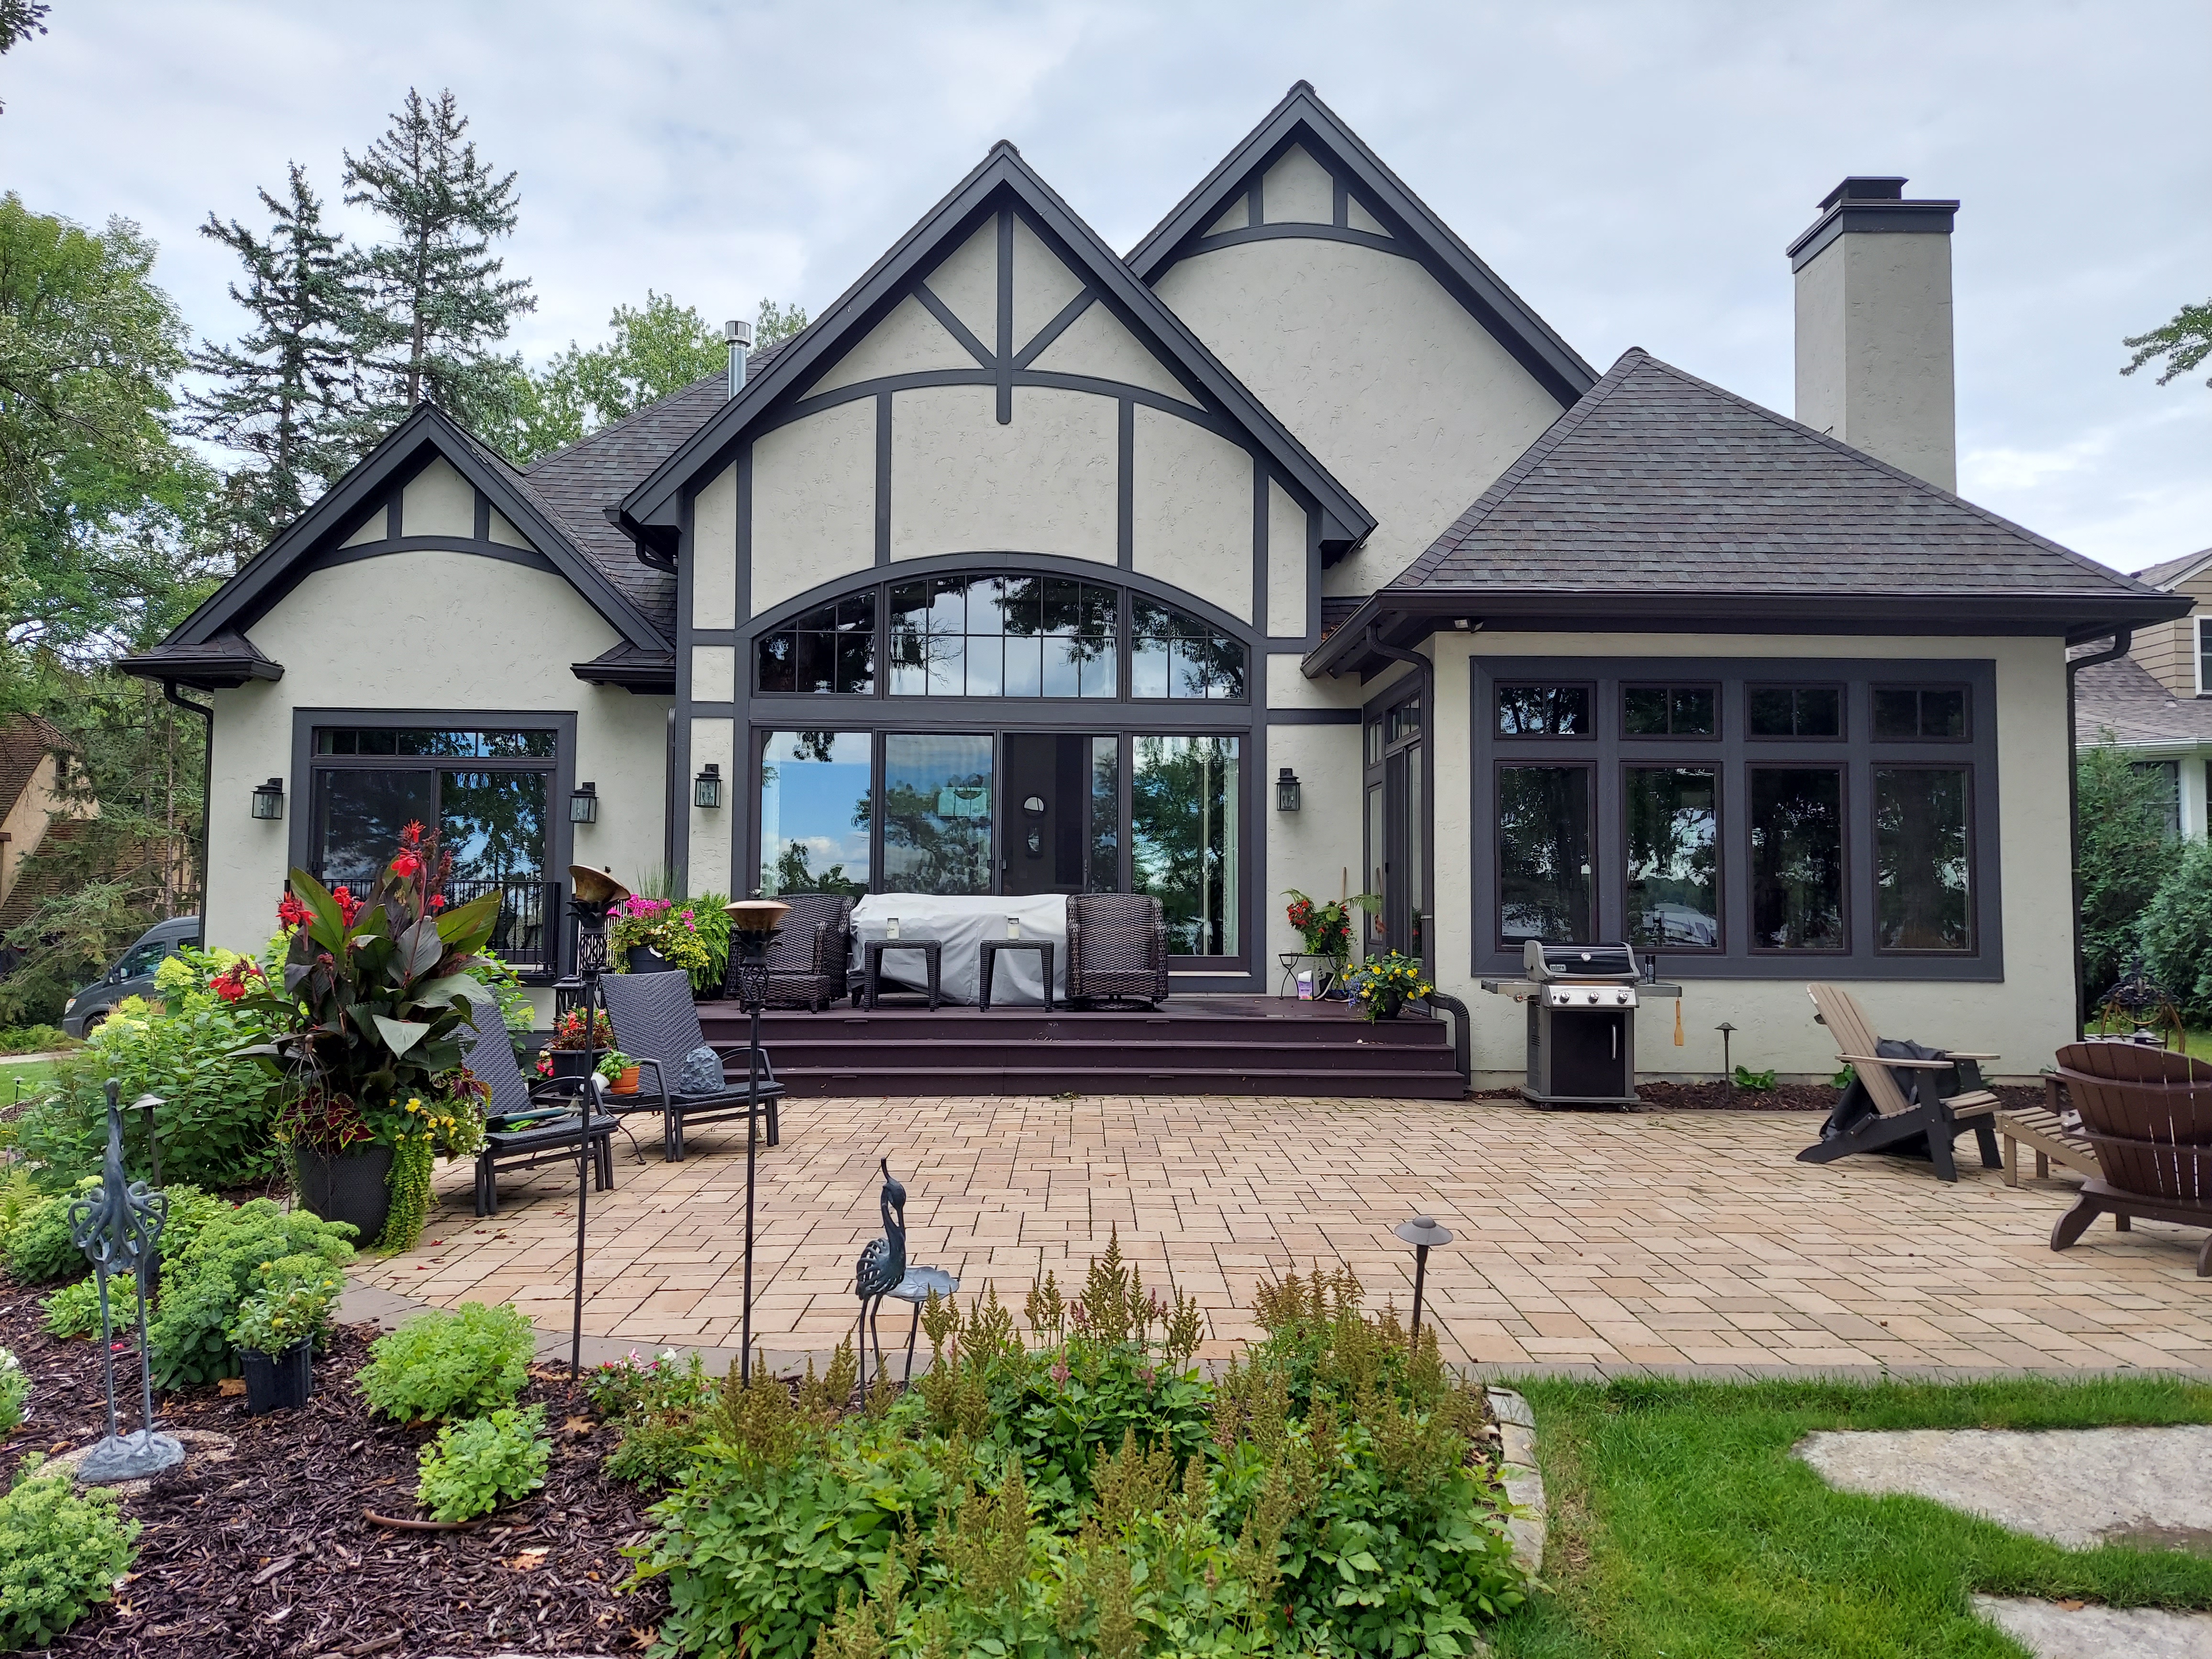 Professional Interior and exterior window cleaning in White Bear Lake, MN